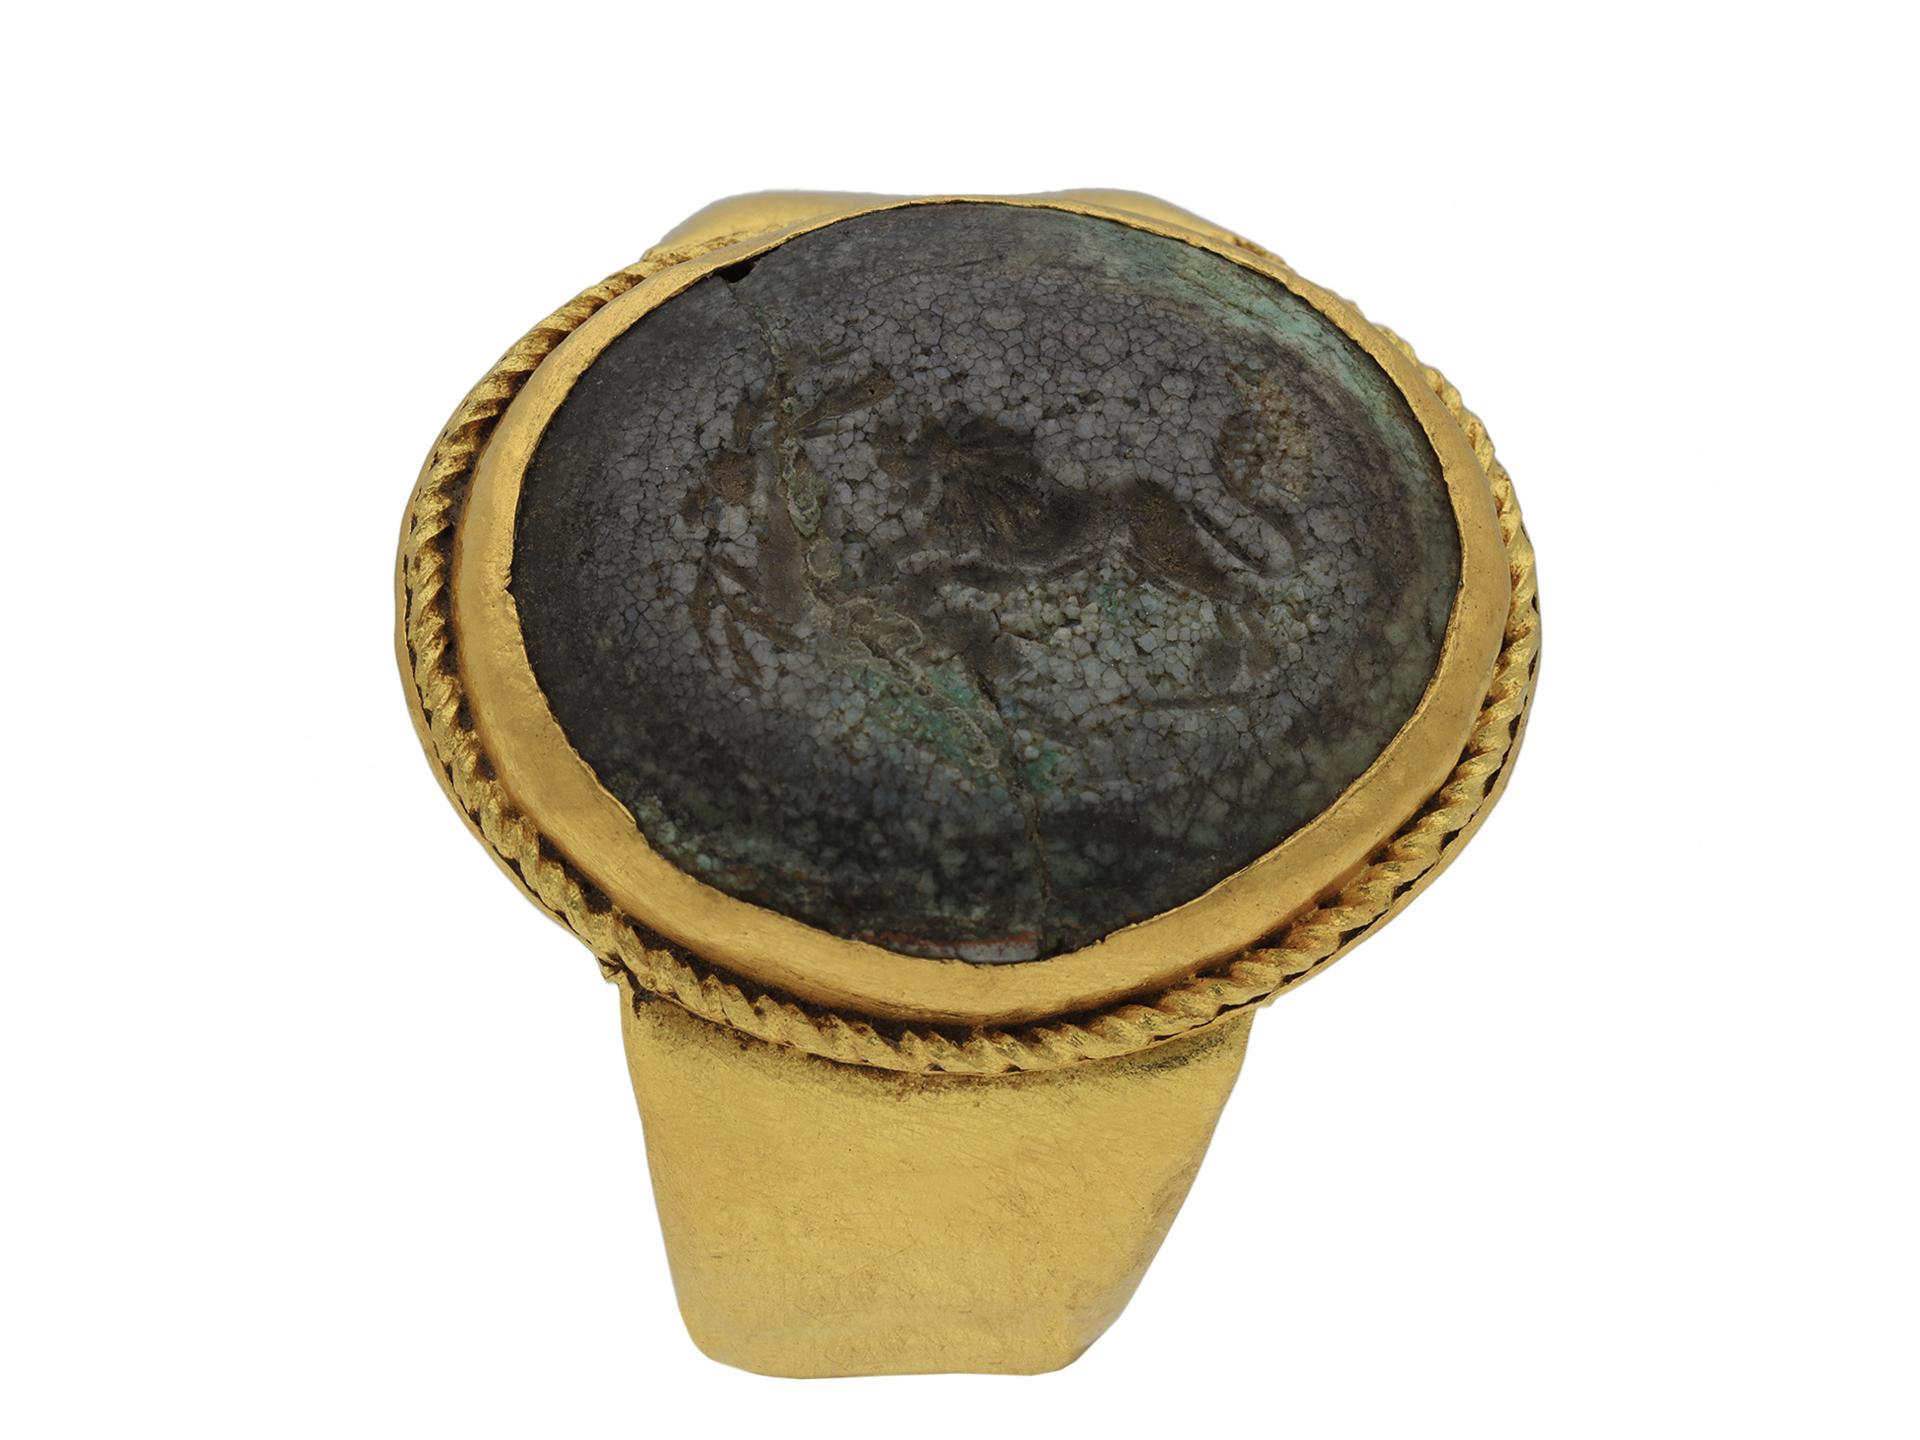 Ancient Roman signet ring. Set with one central oval hardstone intaglio in a closed back Roman set setting engraved with a lion catching a gazelle, to an oval signet featuring a twisted wire border and polished edges, leading to trumpeting shoulders